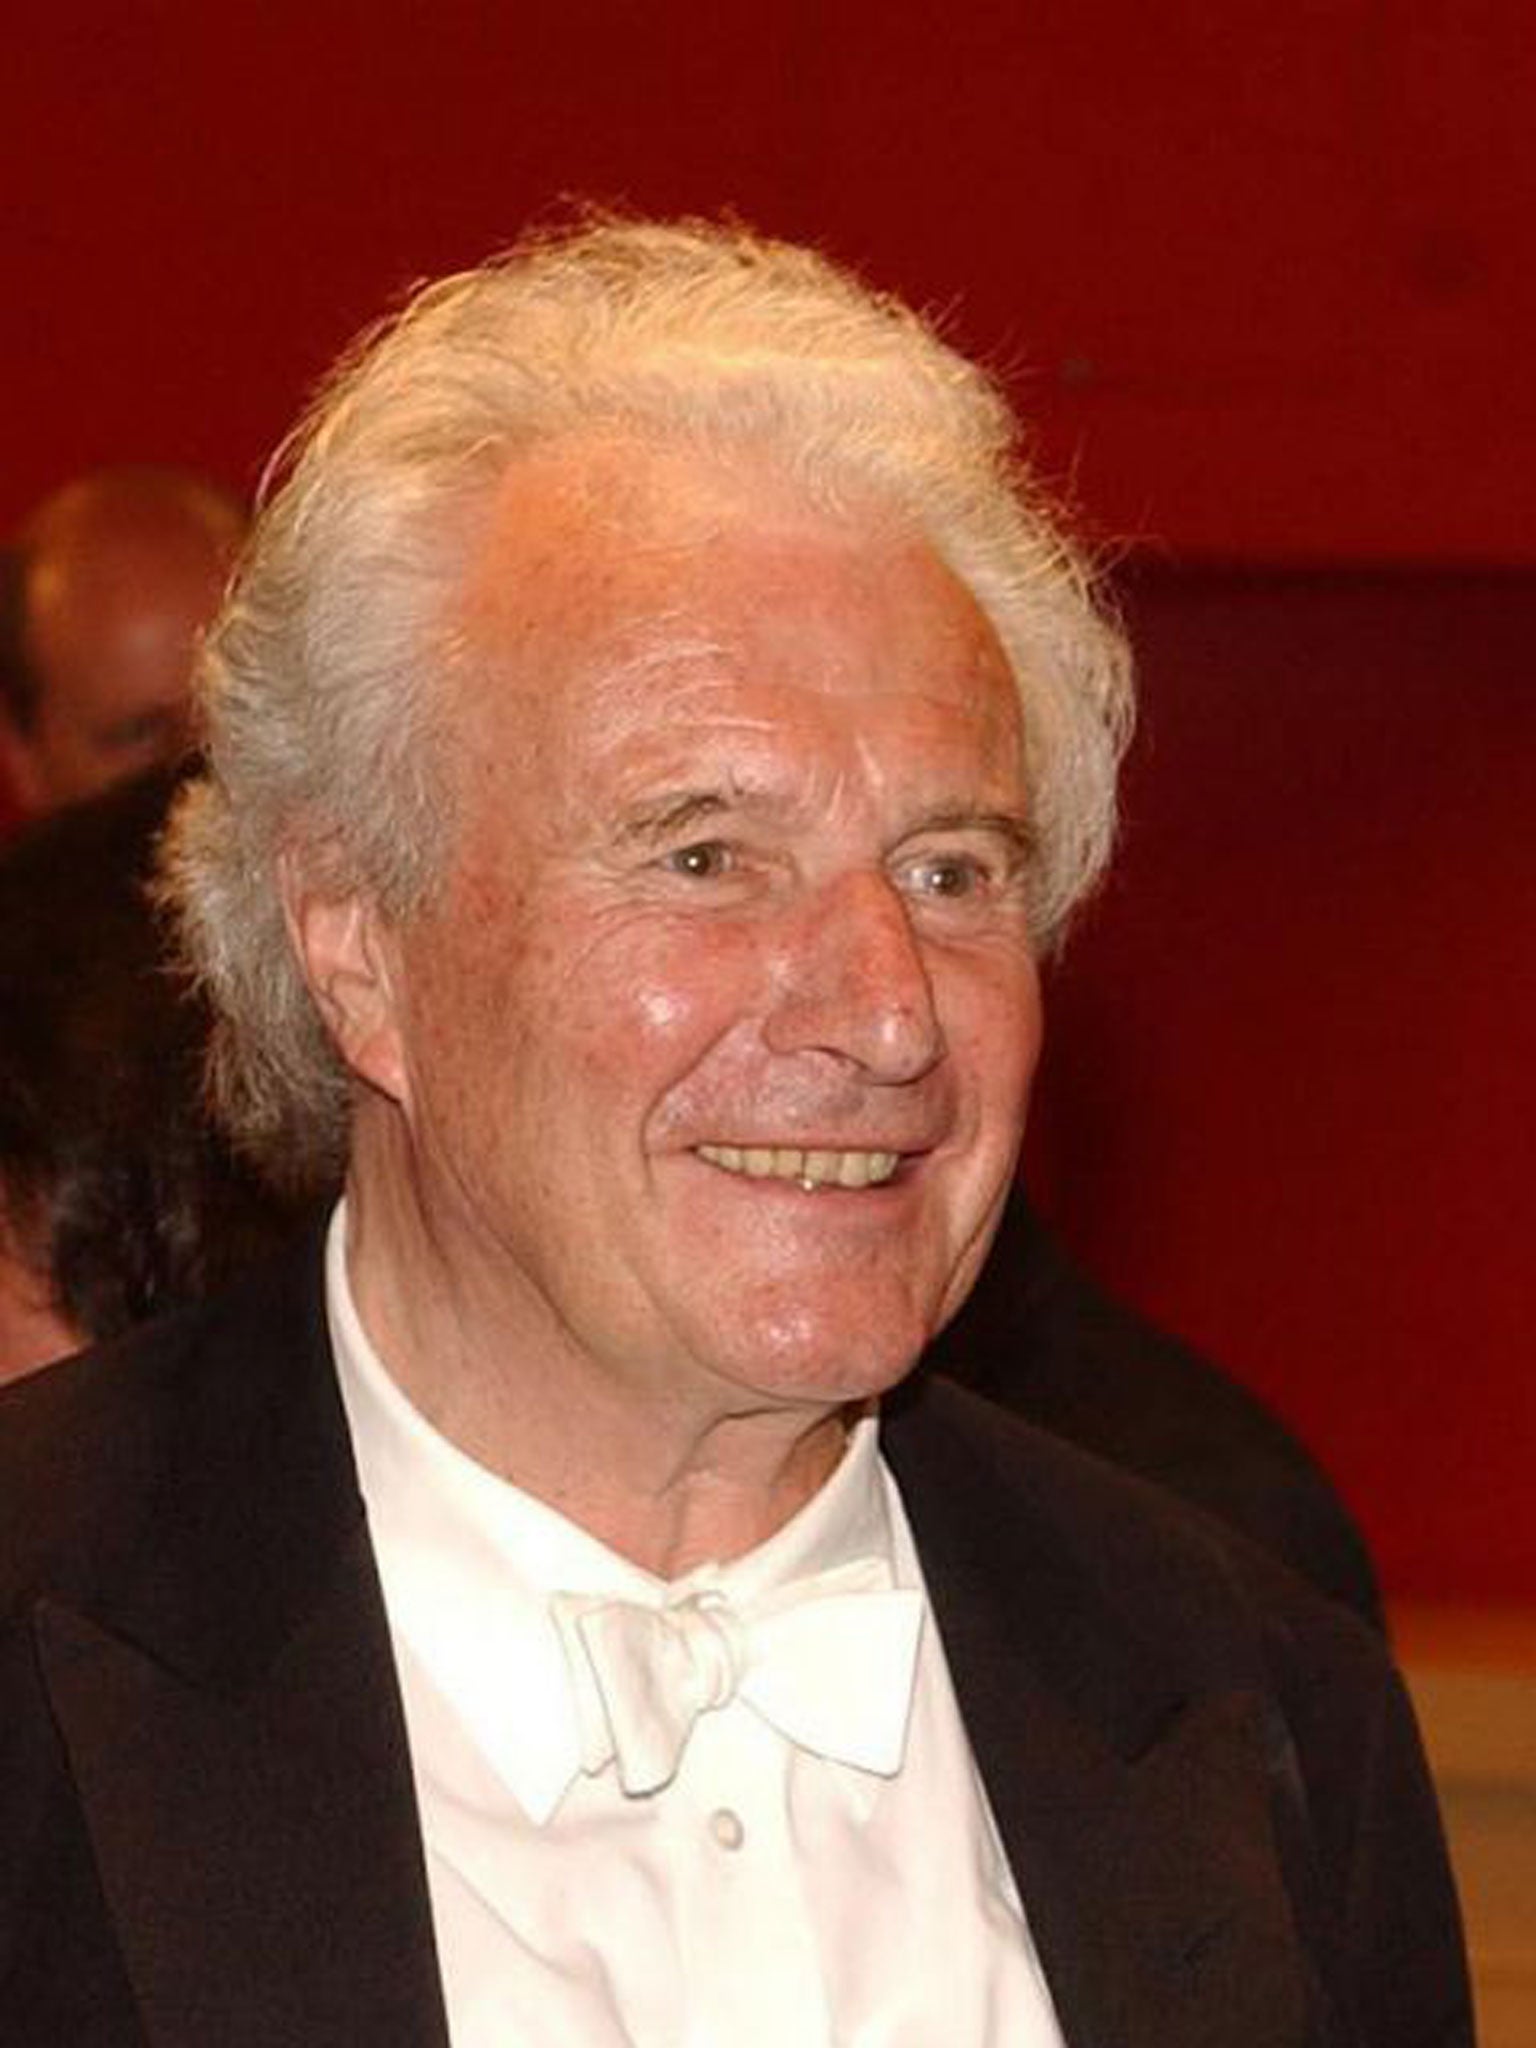 In a statement, the LSO said Sir Colin's "role in British musical life was immense"